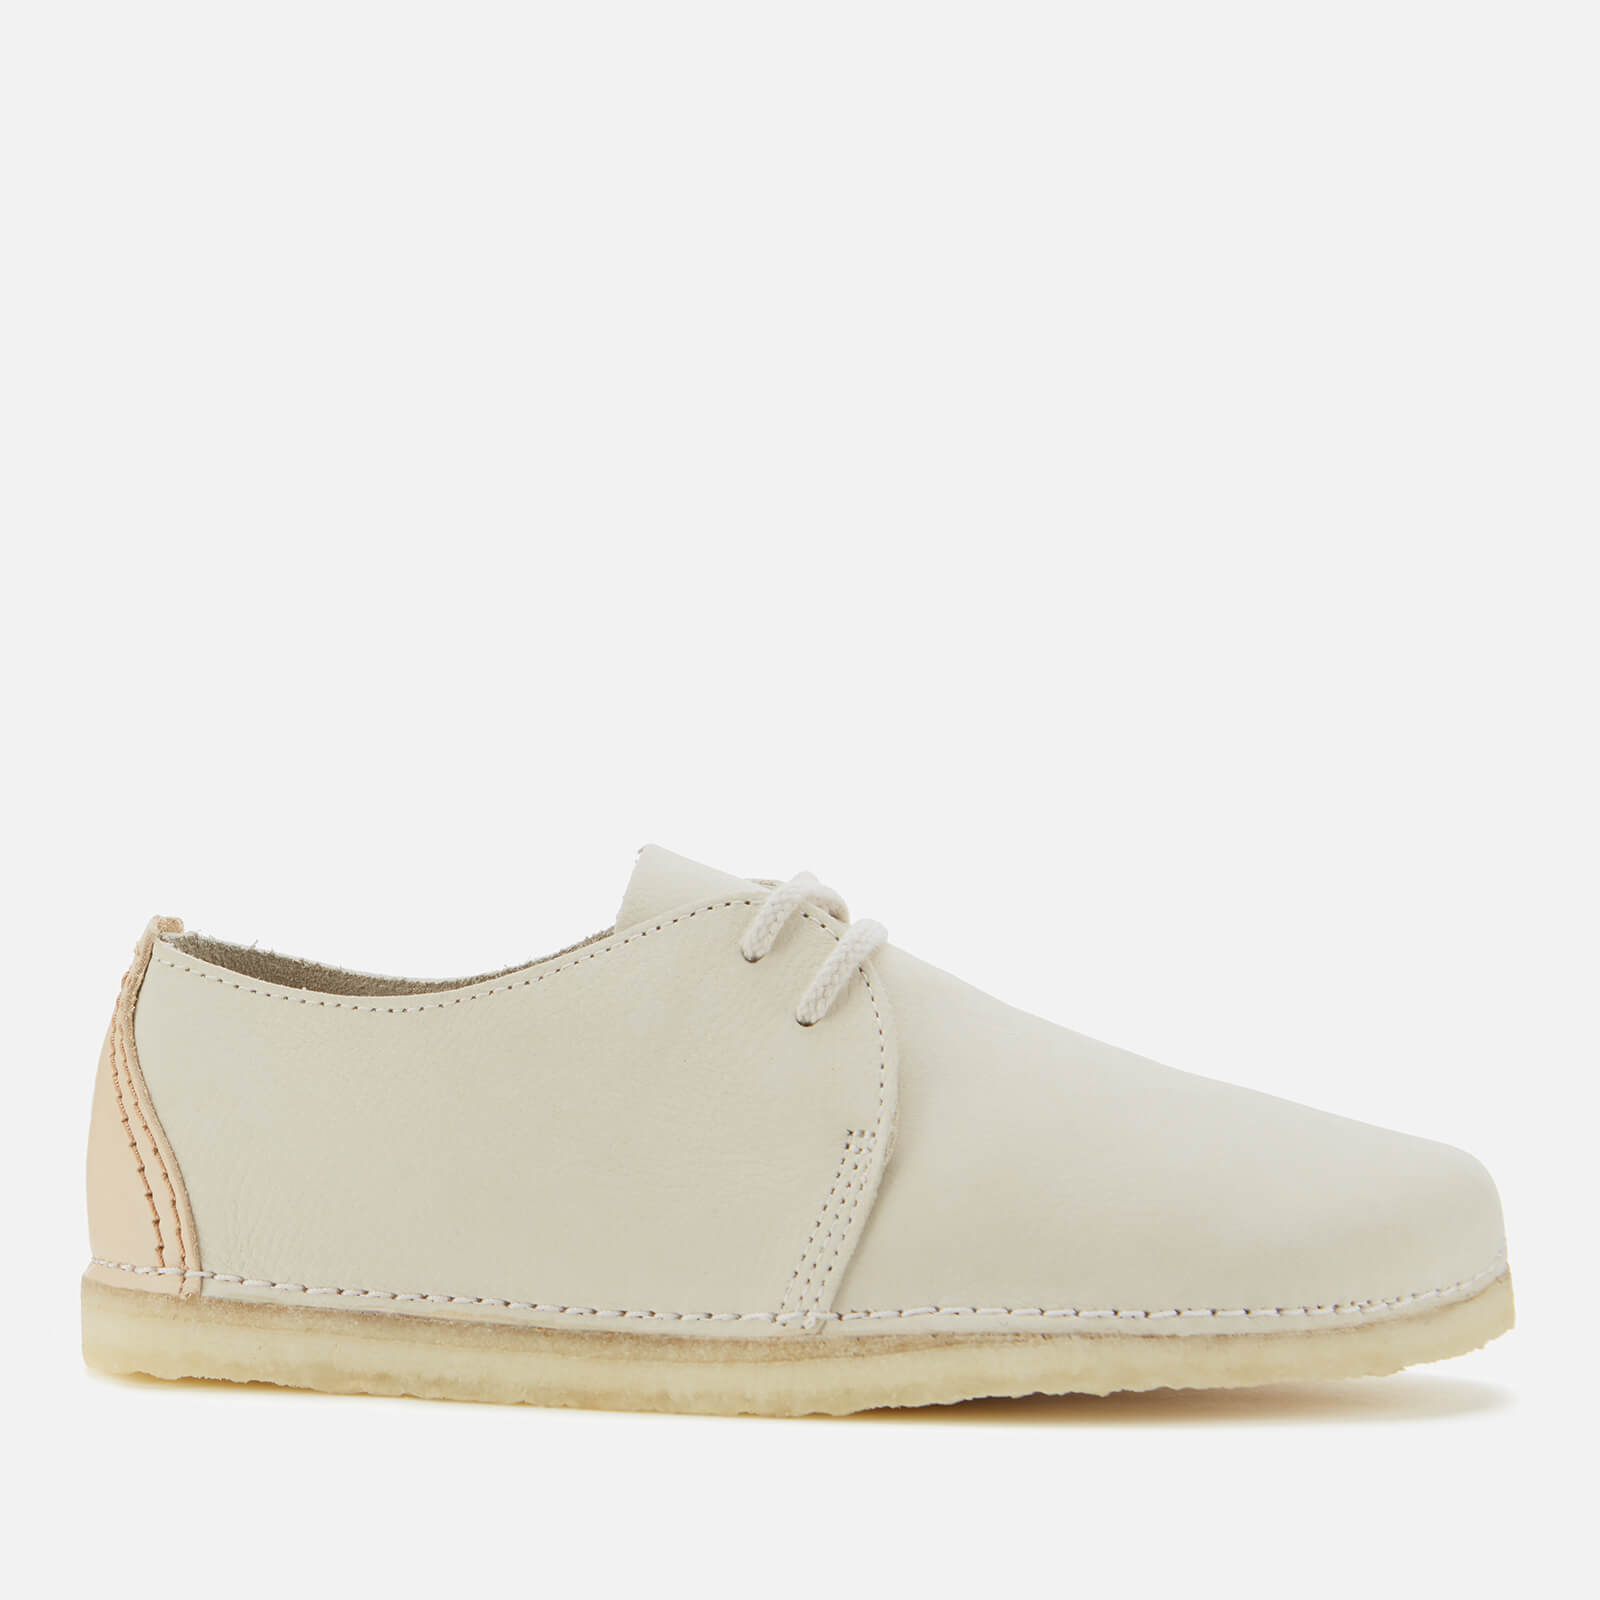 clarks white flat shoes